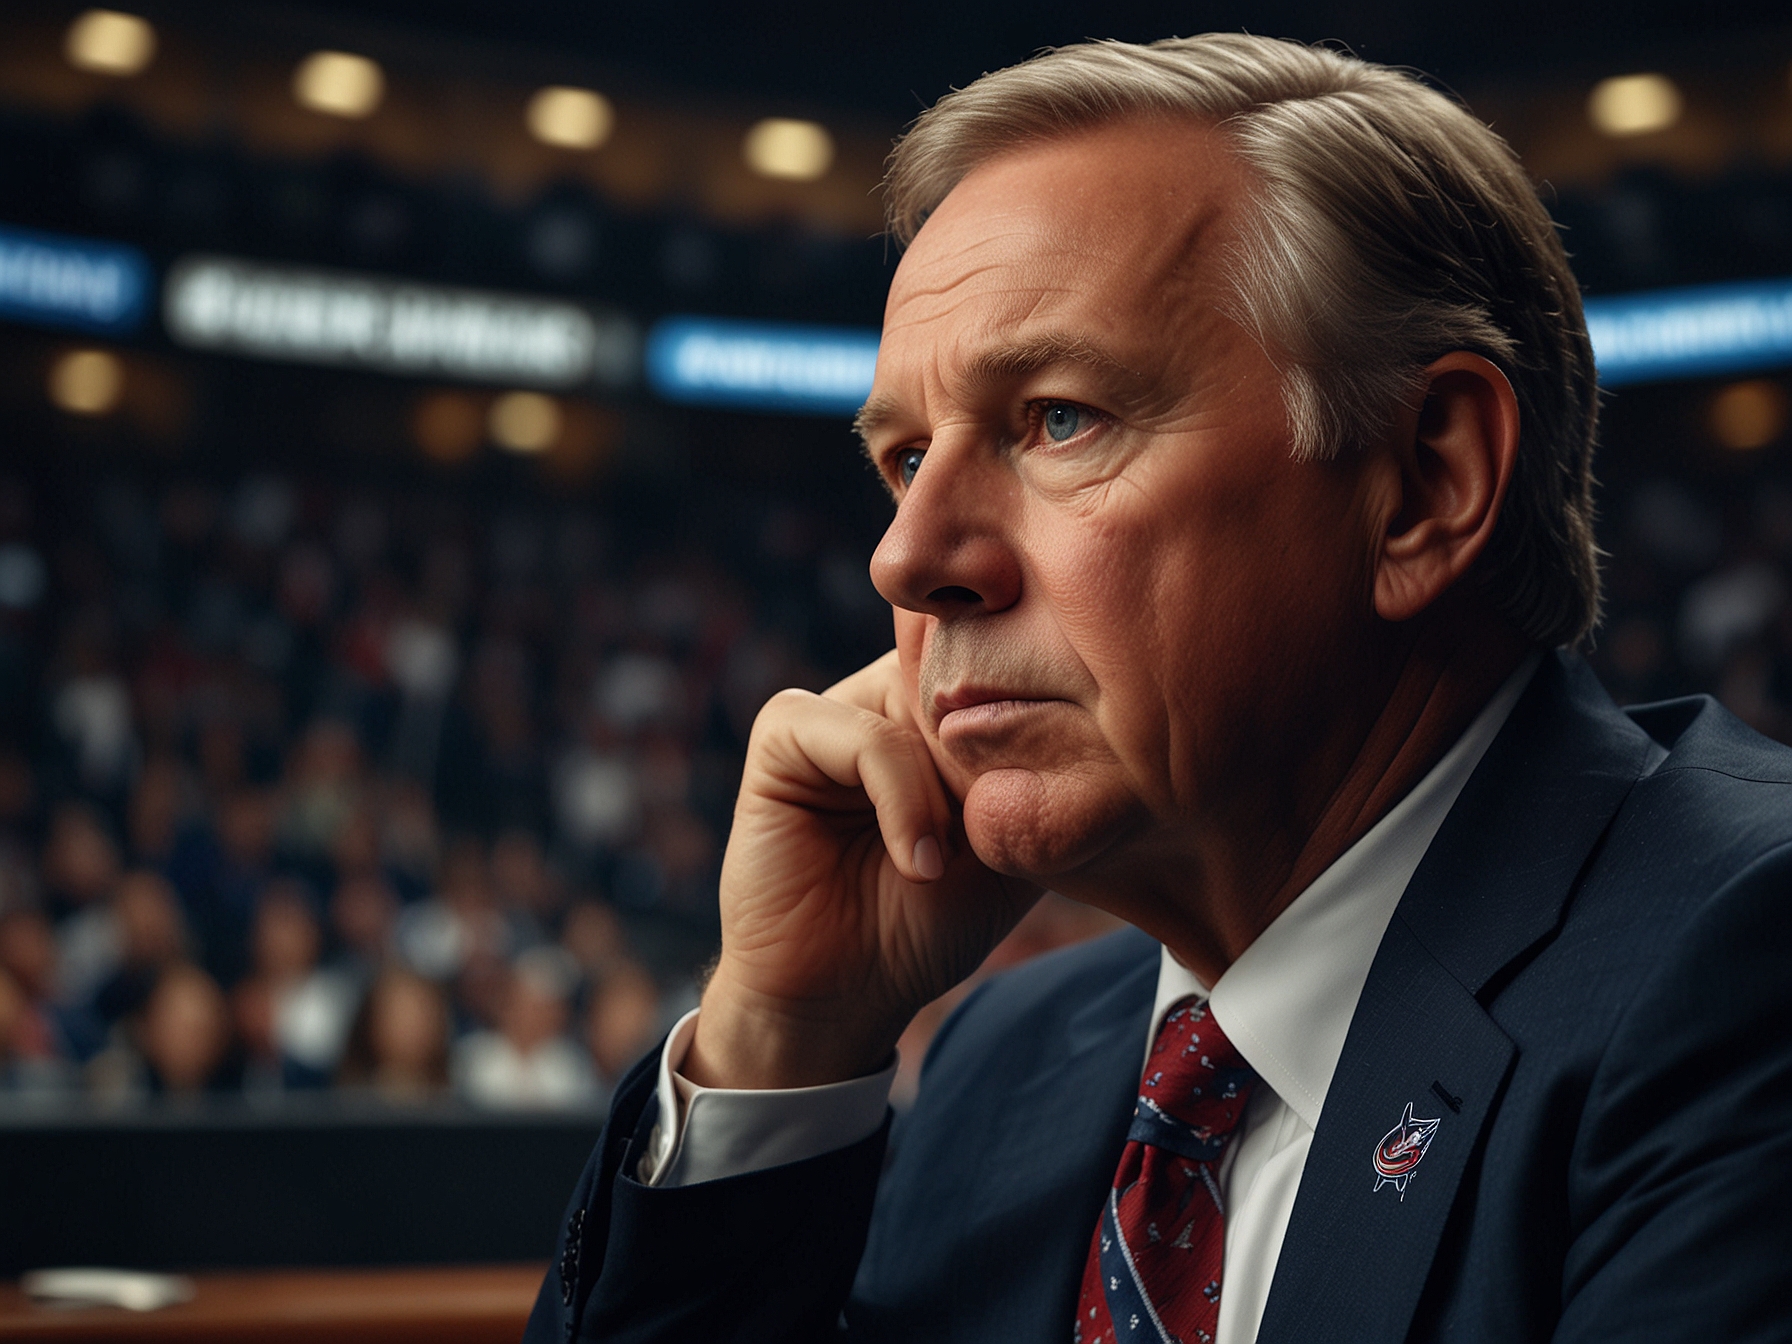 An image of Don Waddell, the new president and general manager of the Columbus Blue Jackets, deep in thought as he contemplates the pivotal decision surrounding the No. 4 draft pick.